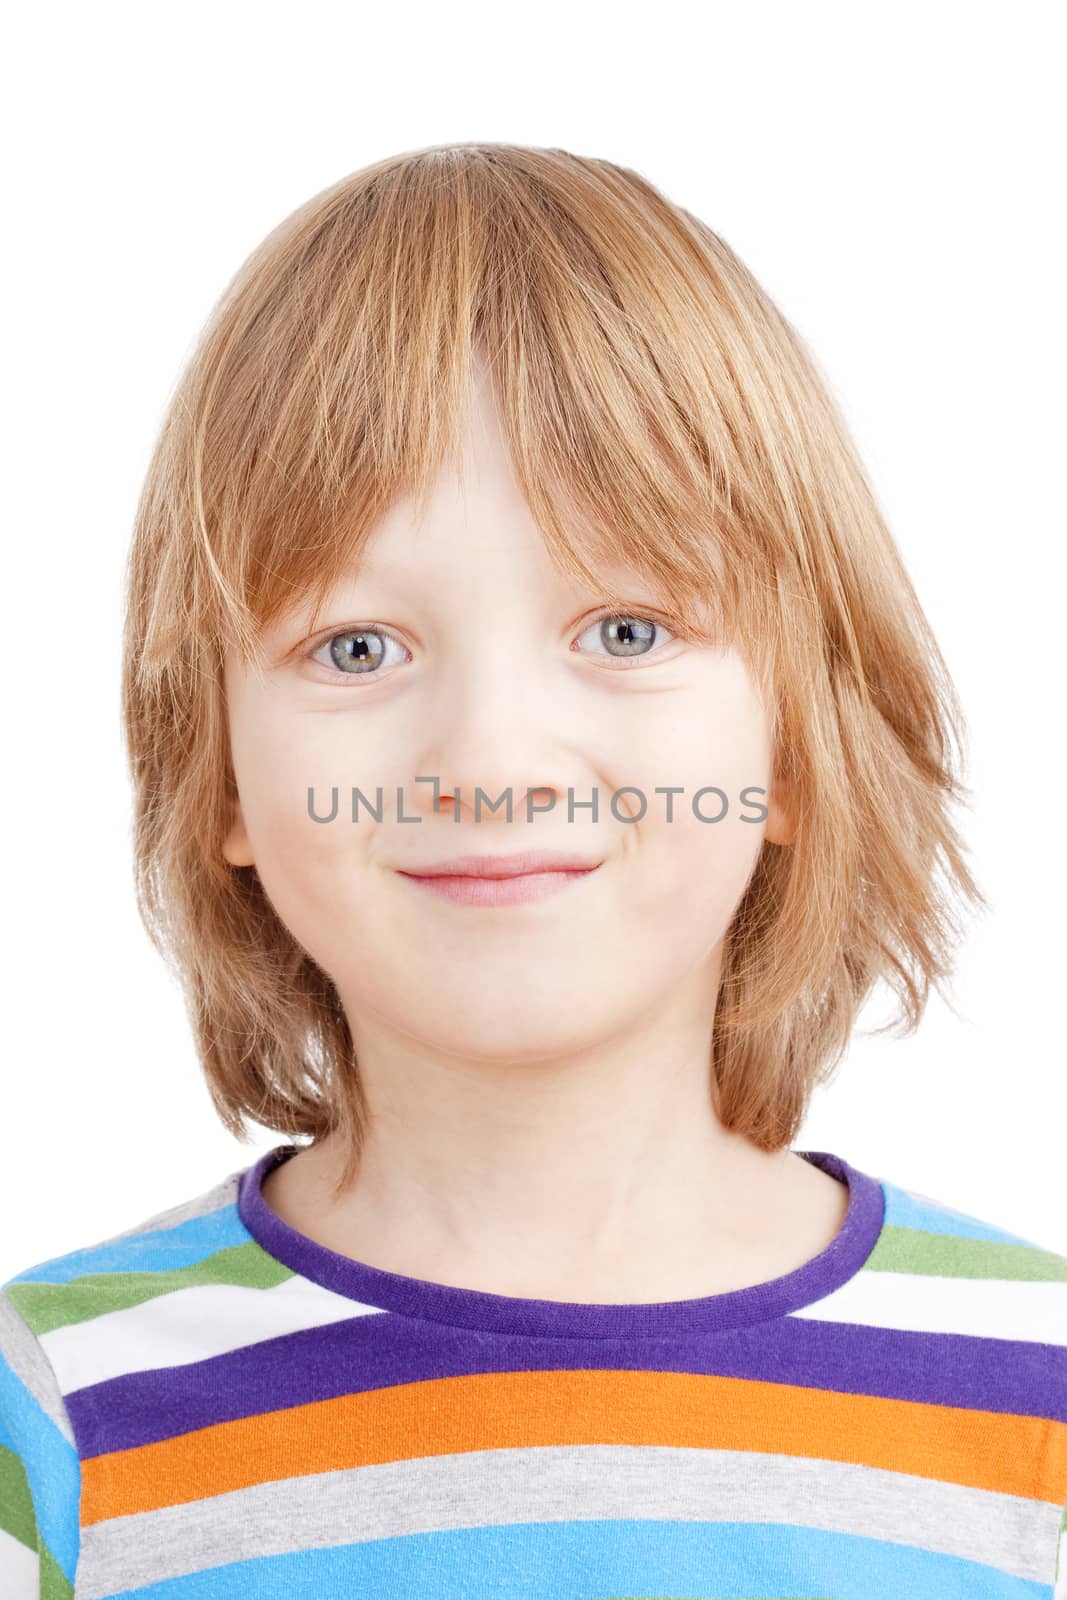 Portrait of a Boy with Blond Hair in Colorful Shirt - Isolated on White